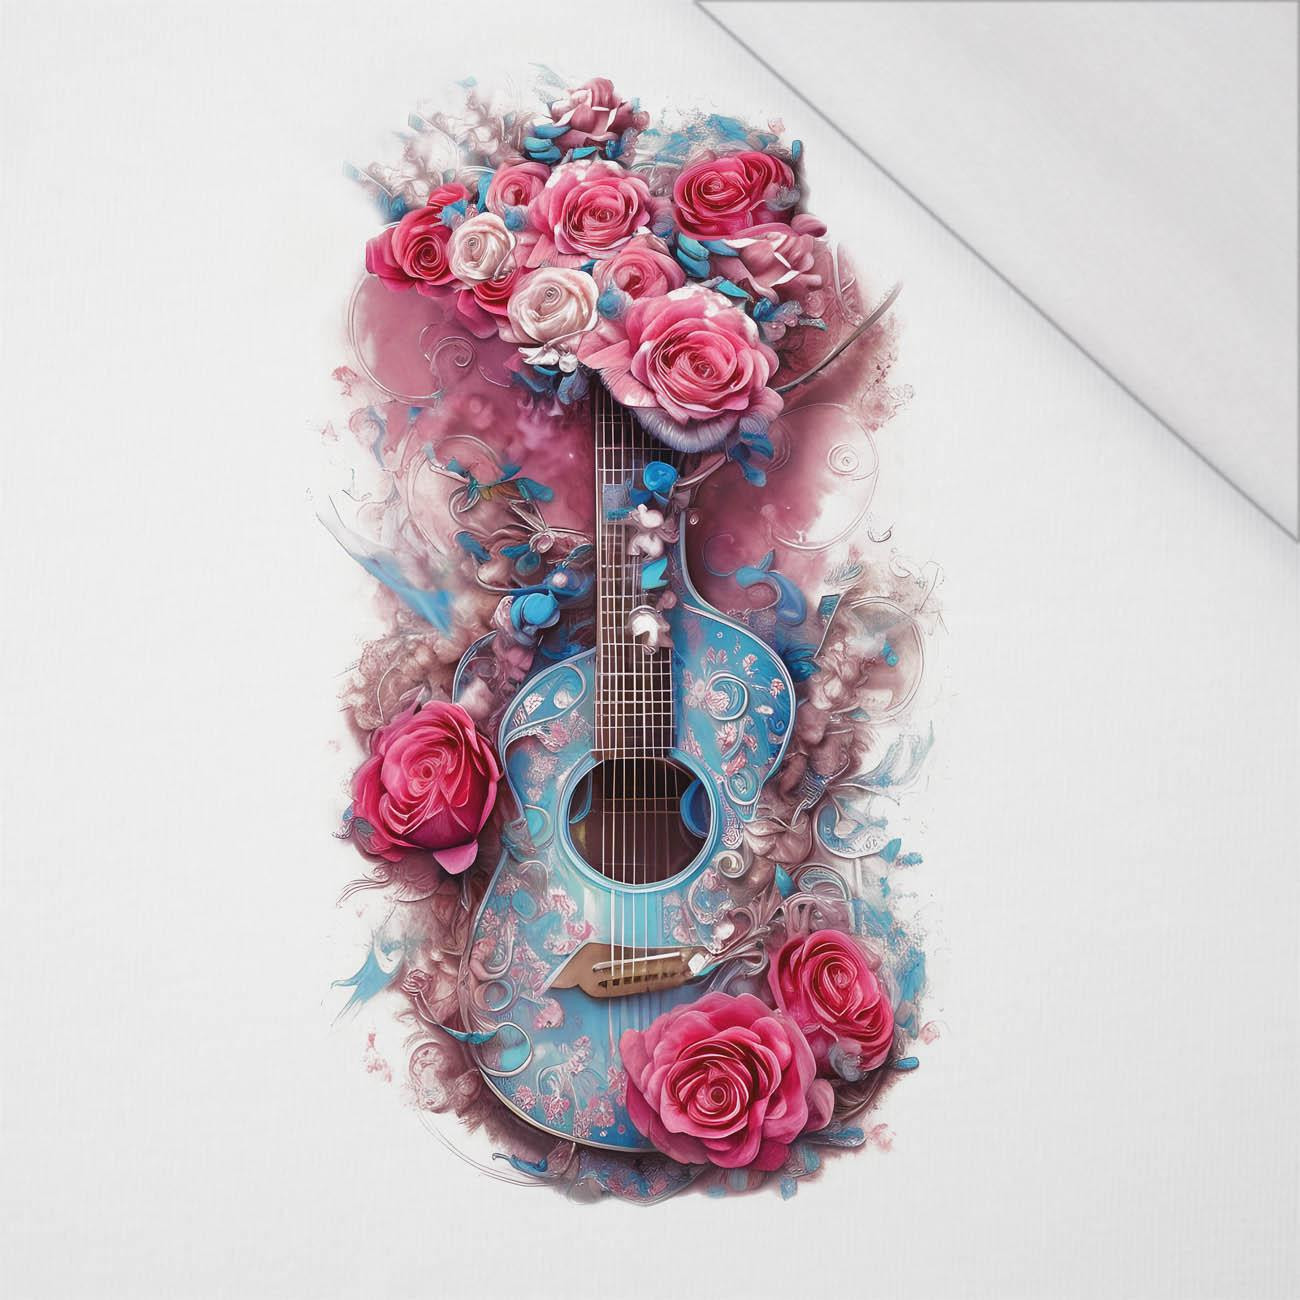 GUITAR WITH ROSES - PANEL (60cm x 50cm) SINGLE JERSEY